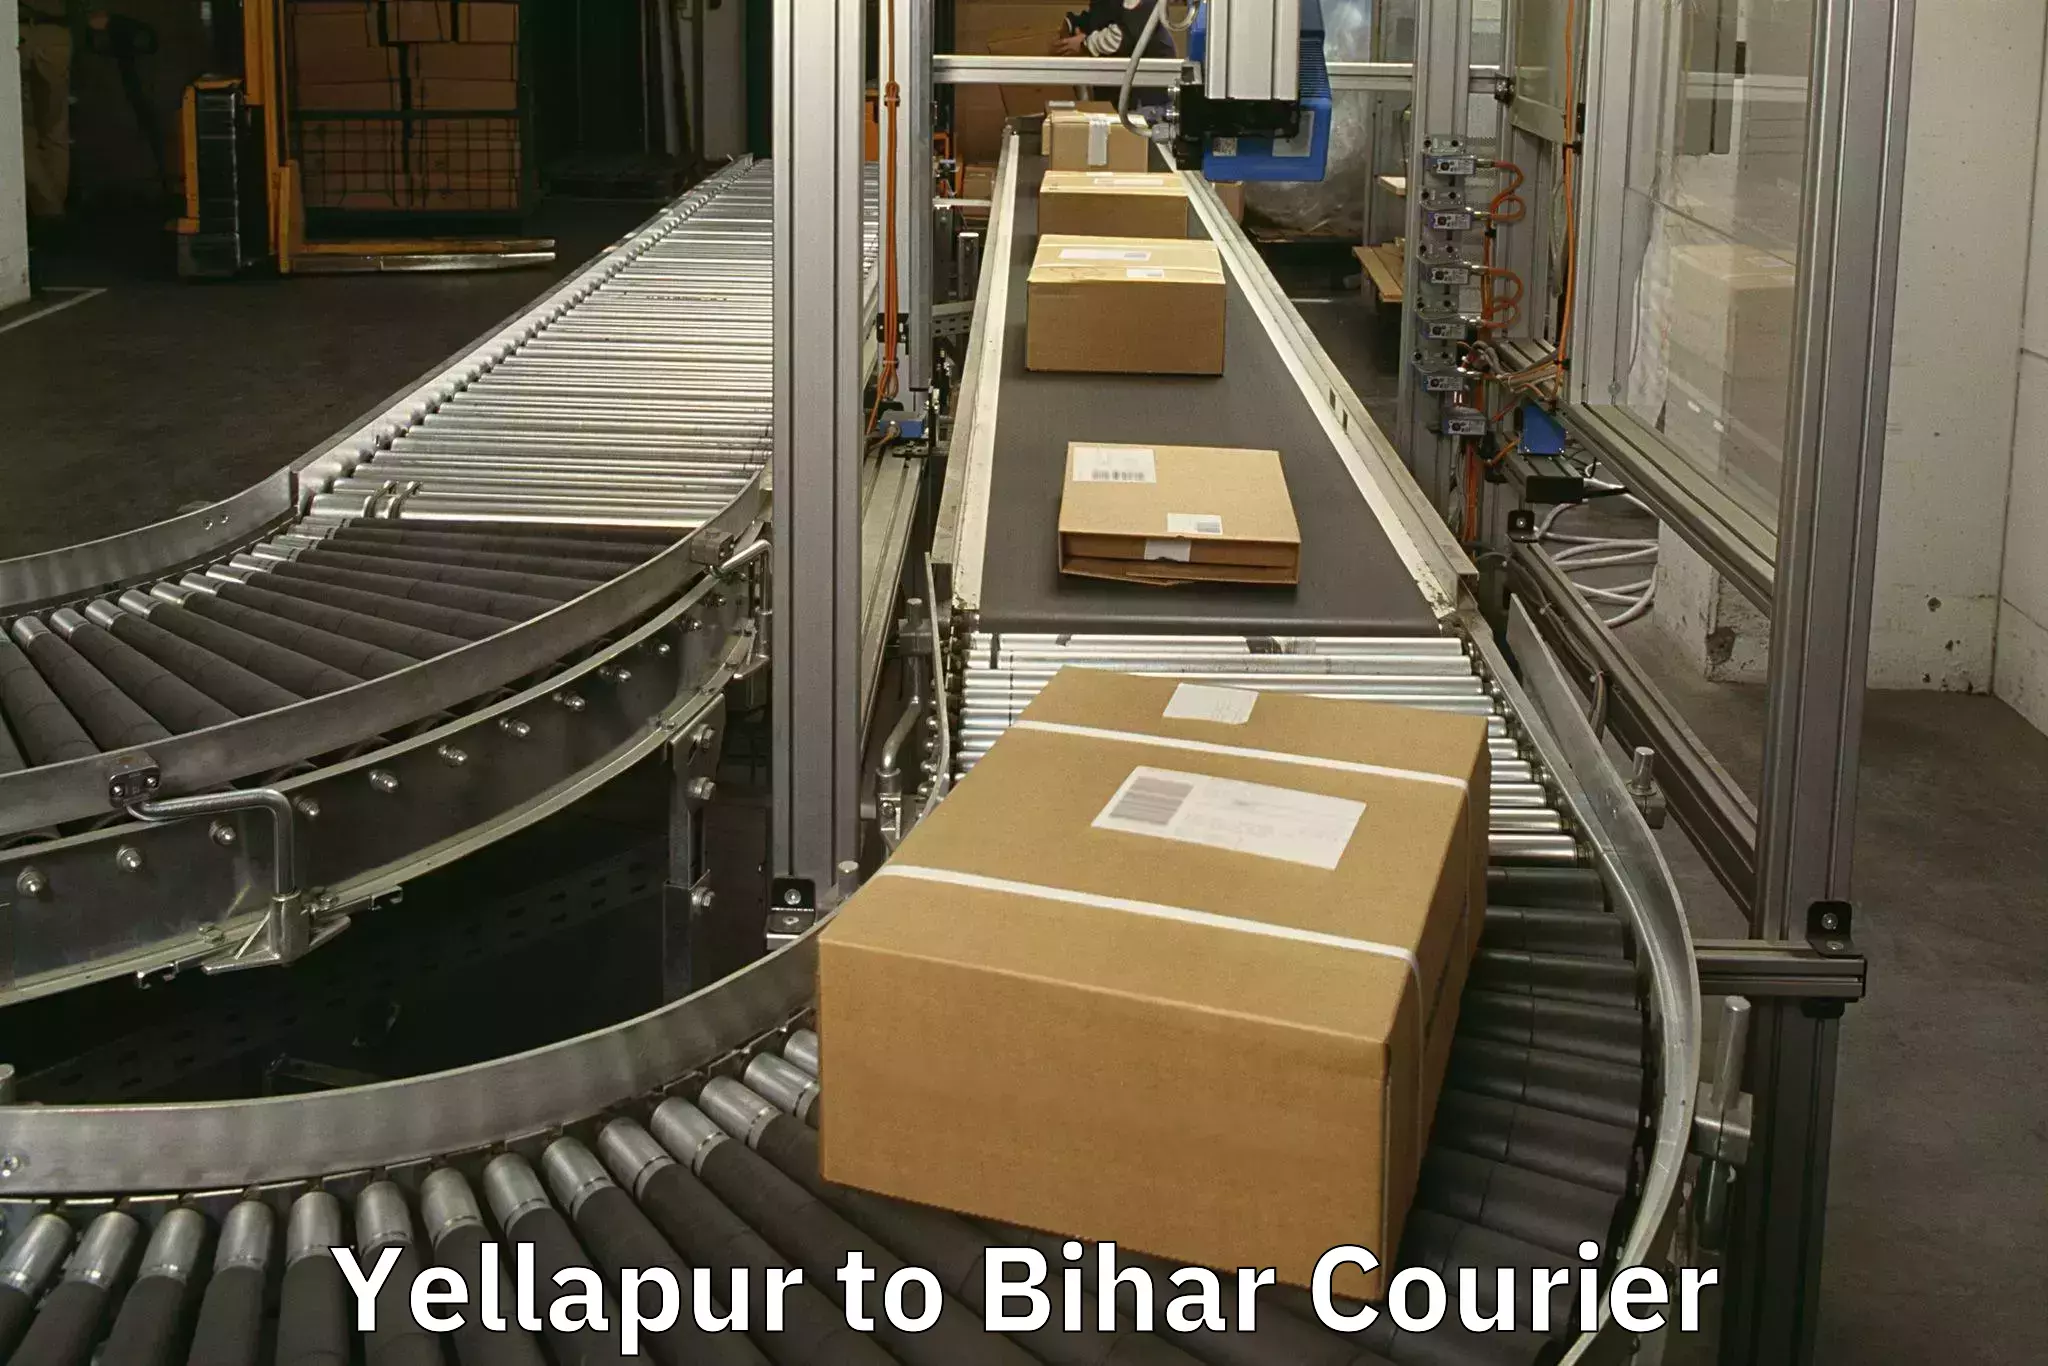 Instant baggage transport quote Yellapur to Barauni